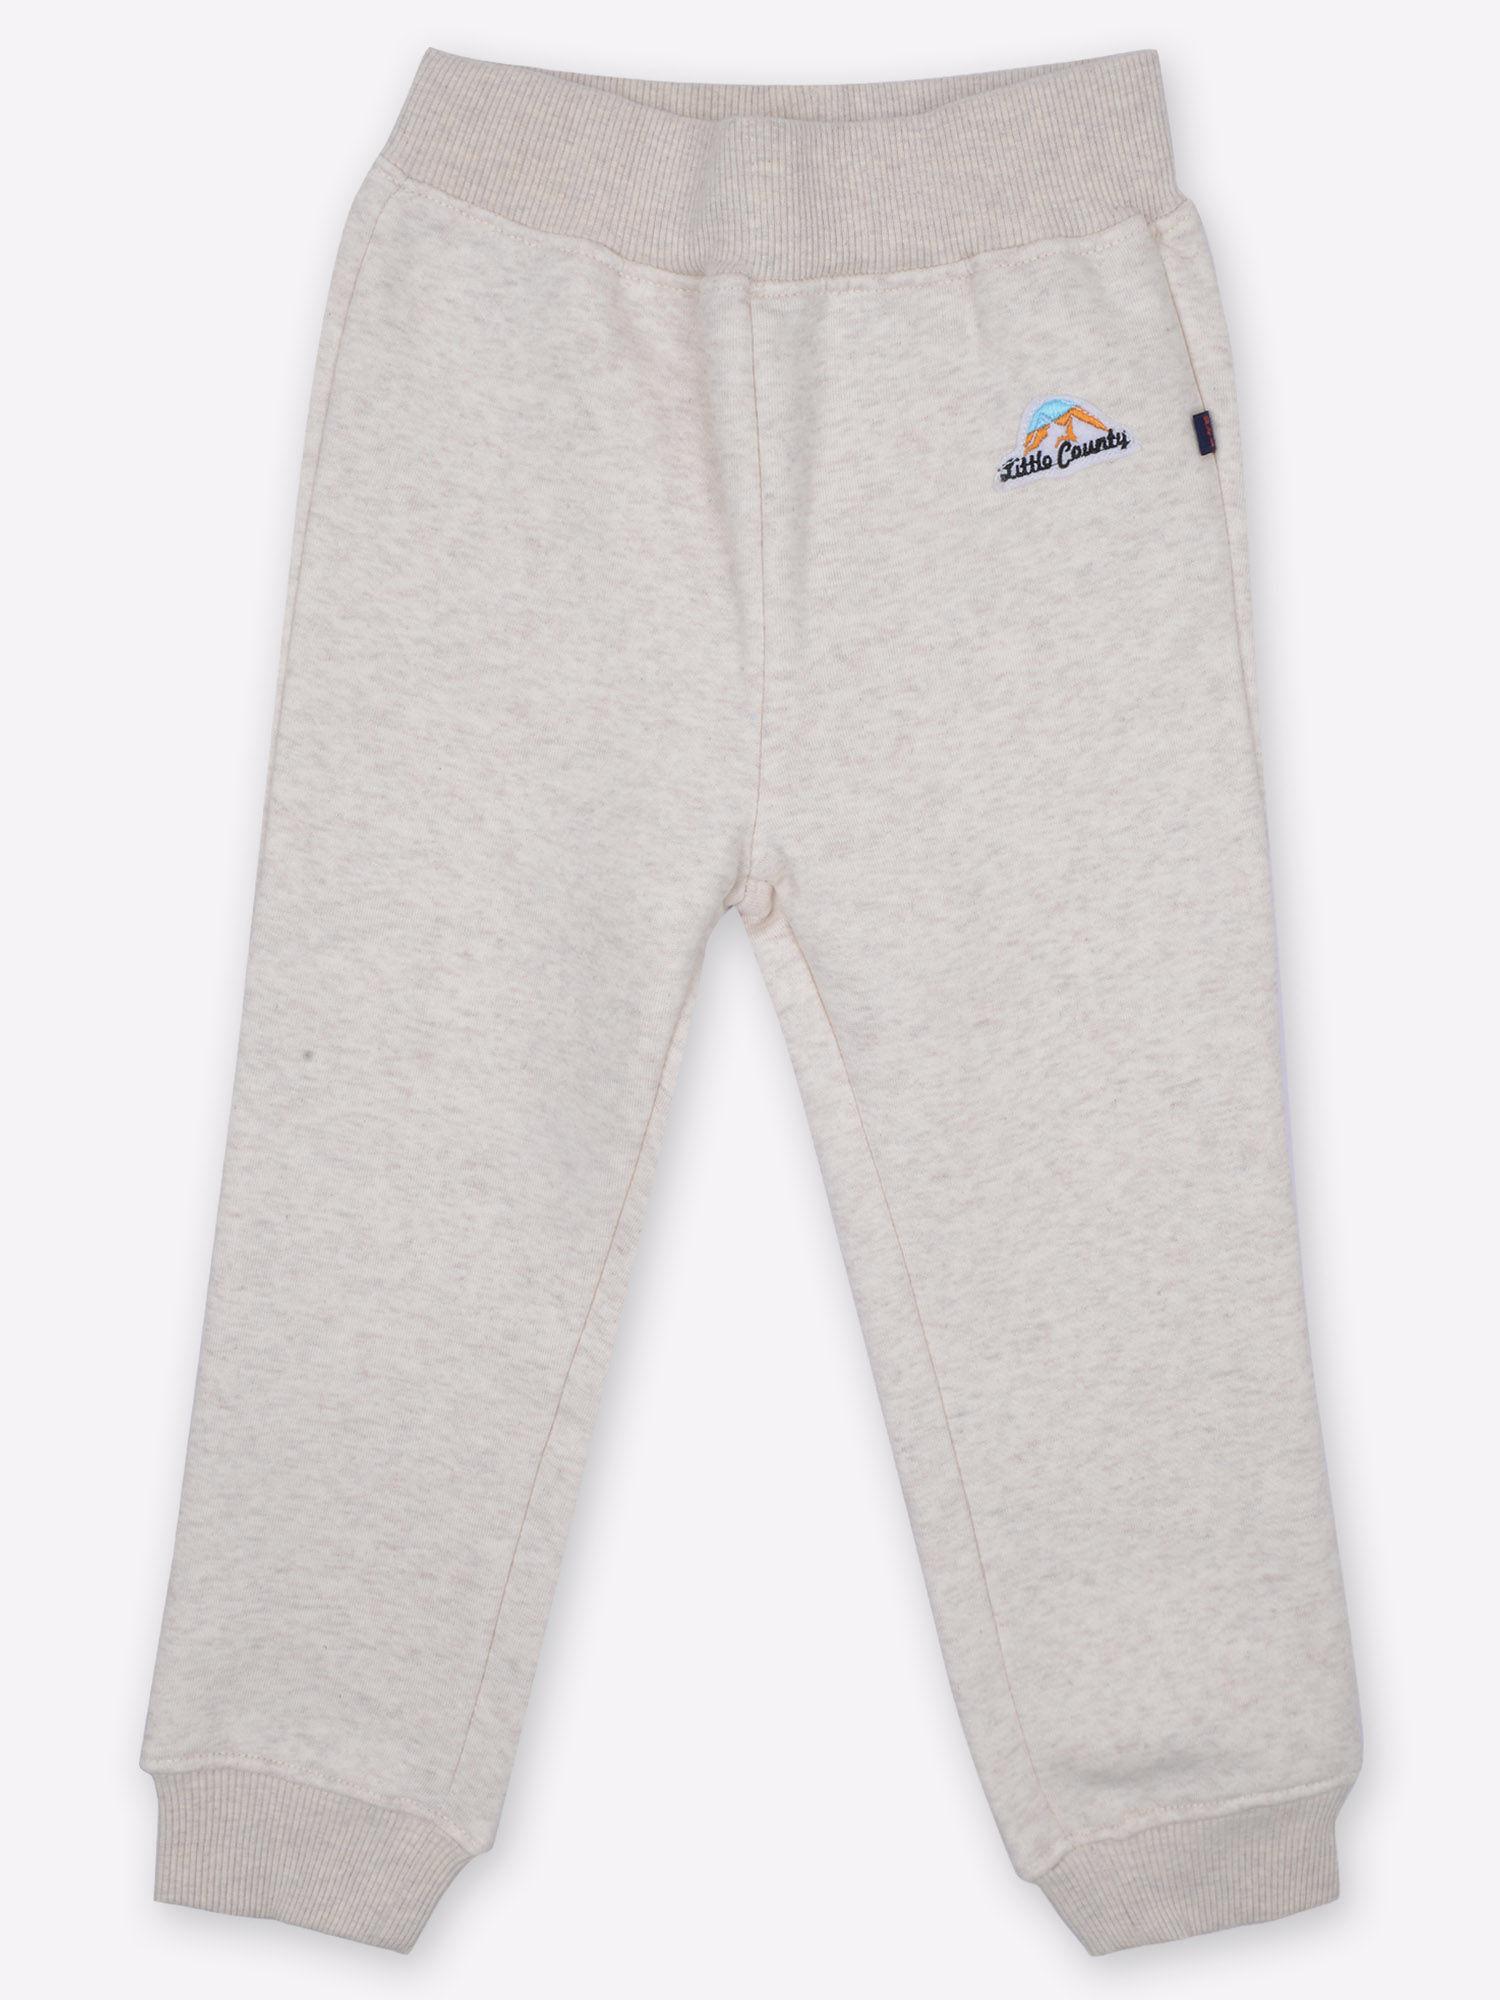 Boys Solid Joggers Track Pant - Grey